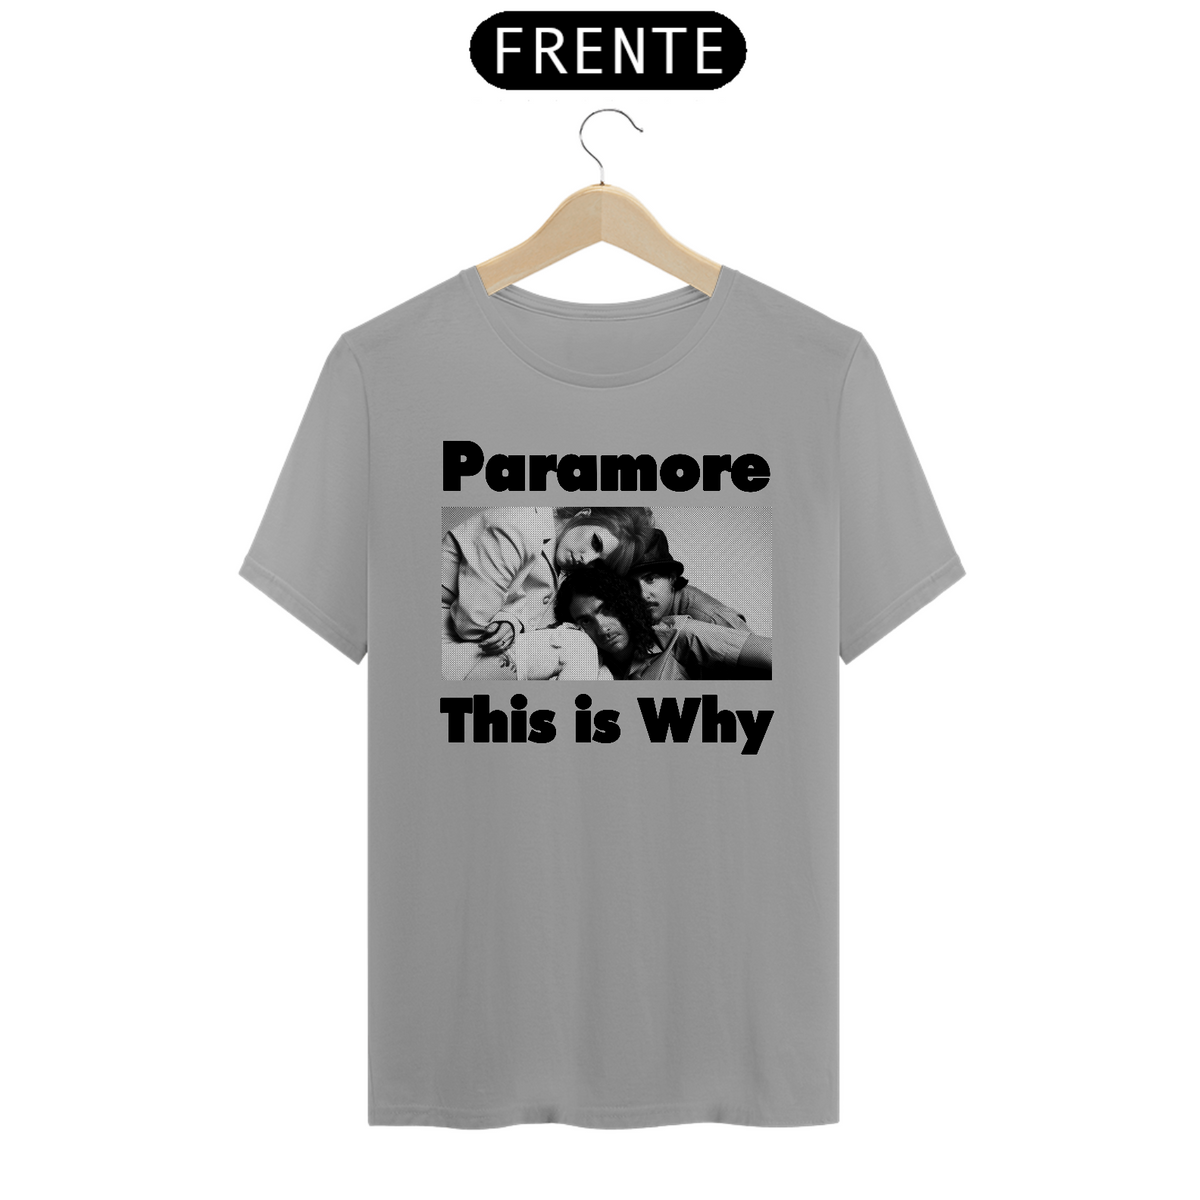 Nome do produto: Paramore This is Why